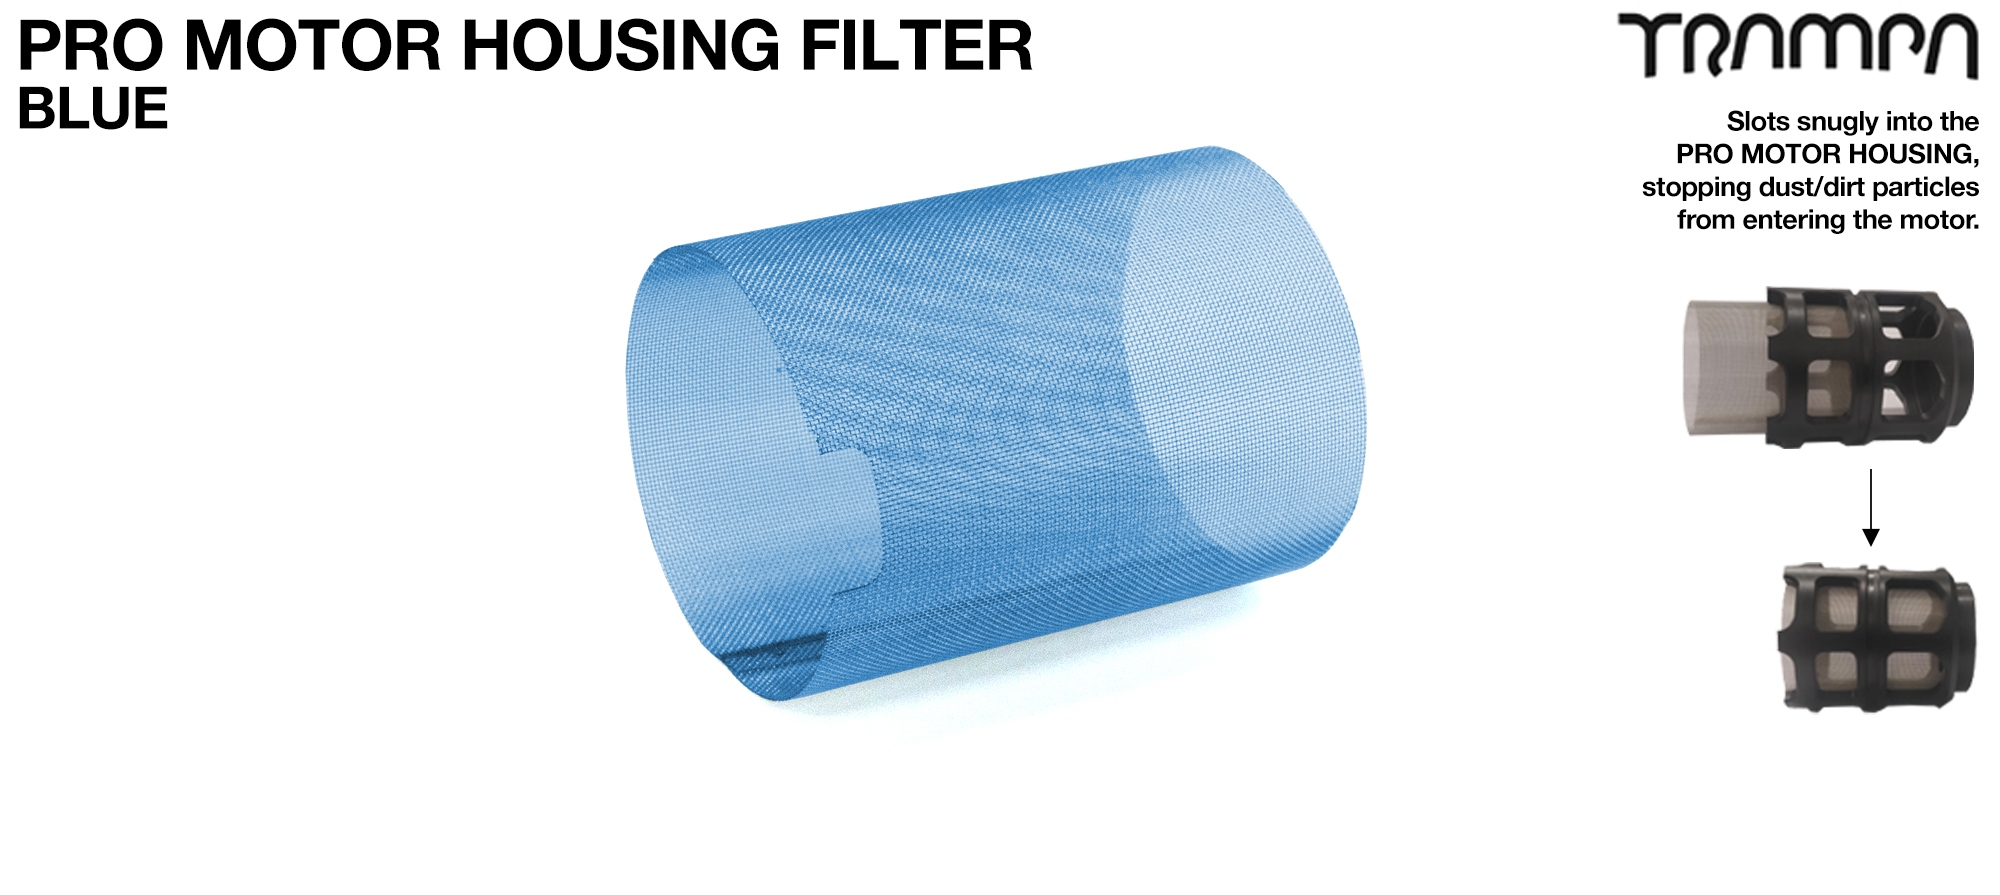 MkII FULL Motor Protection Cover & MESH FILTER - BLUE